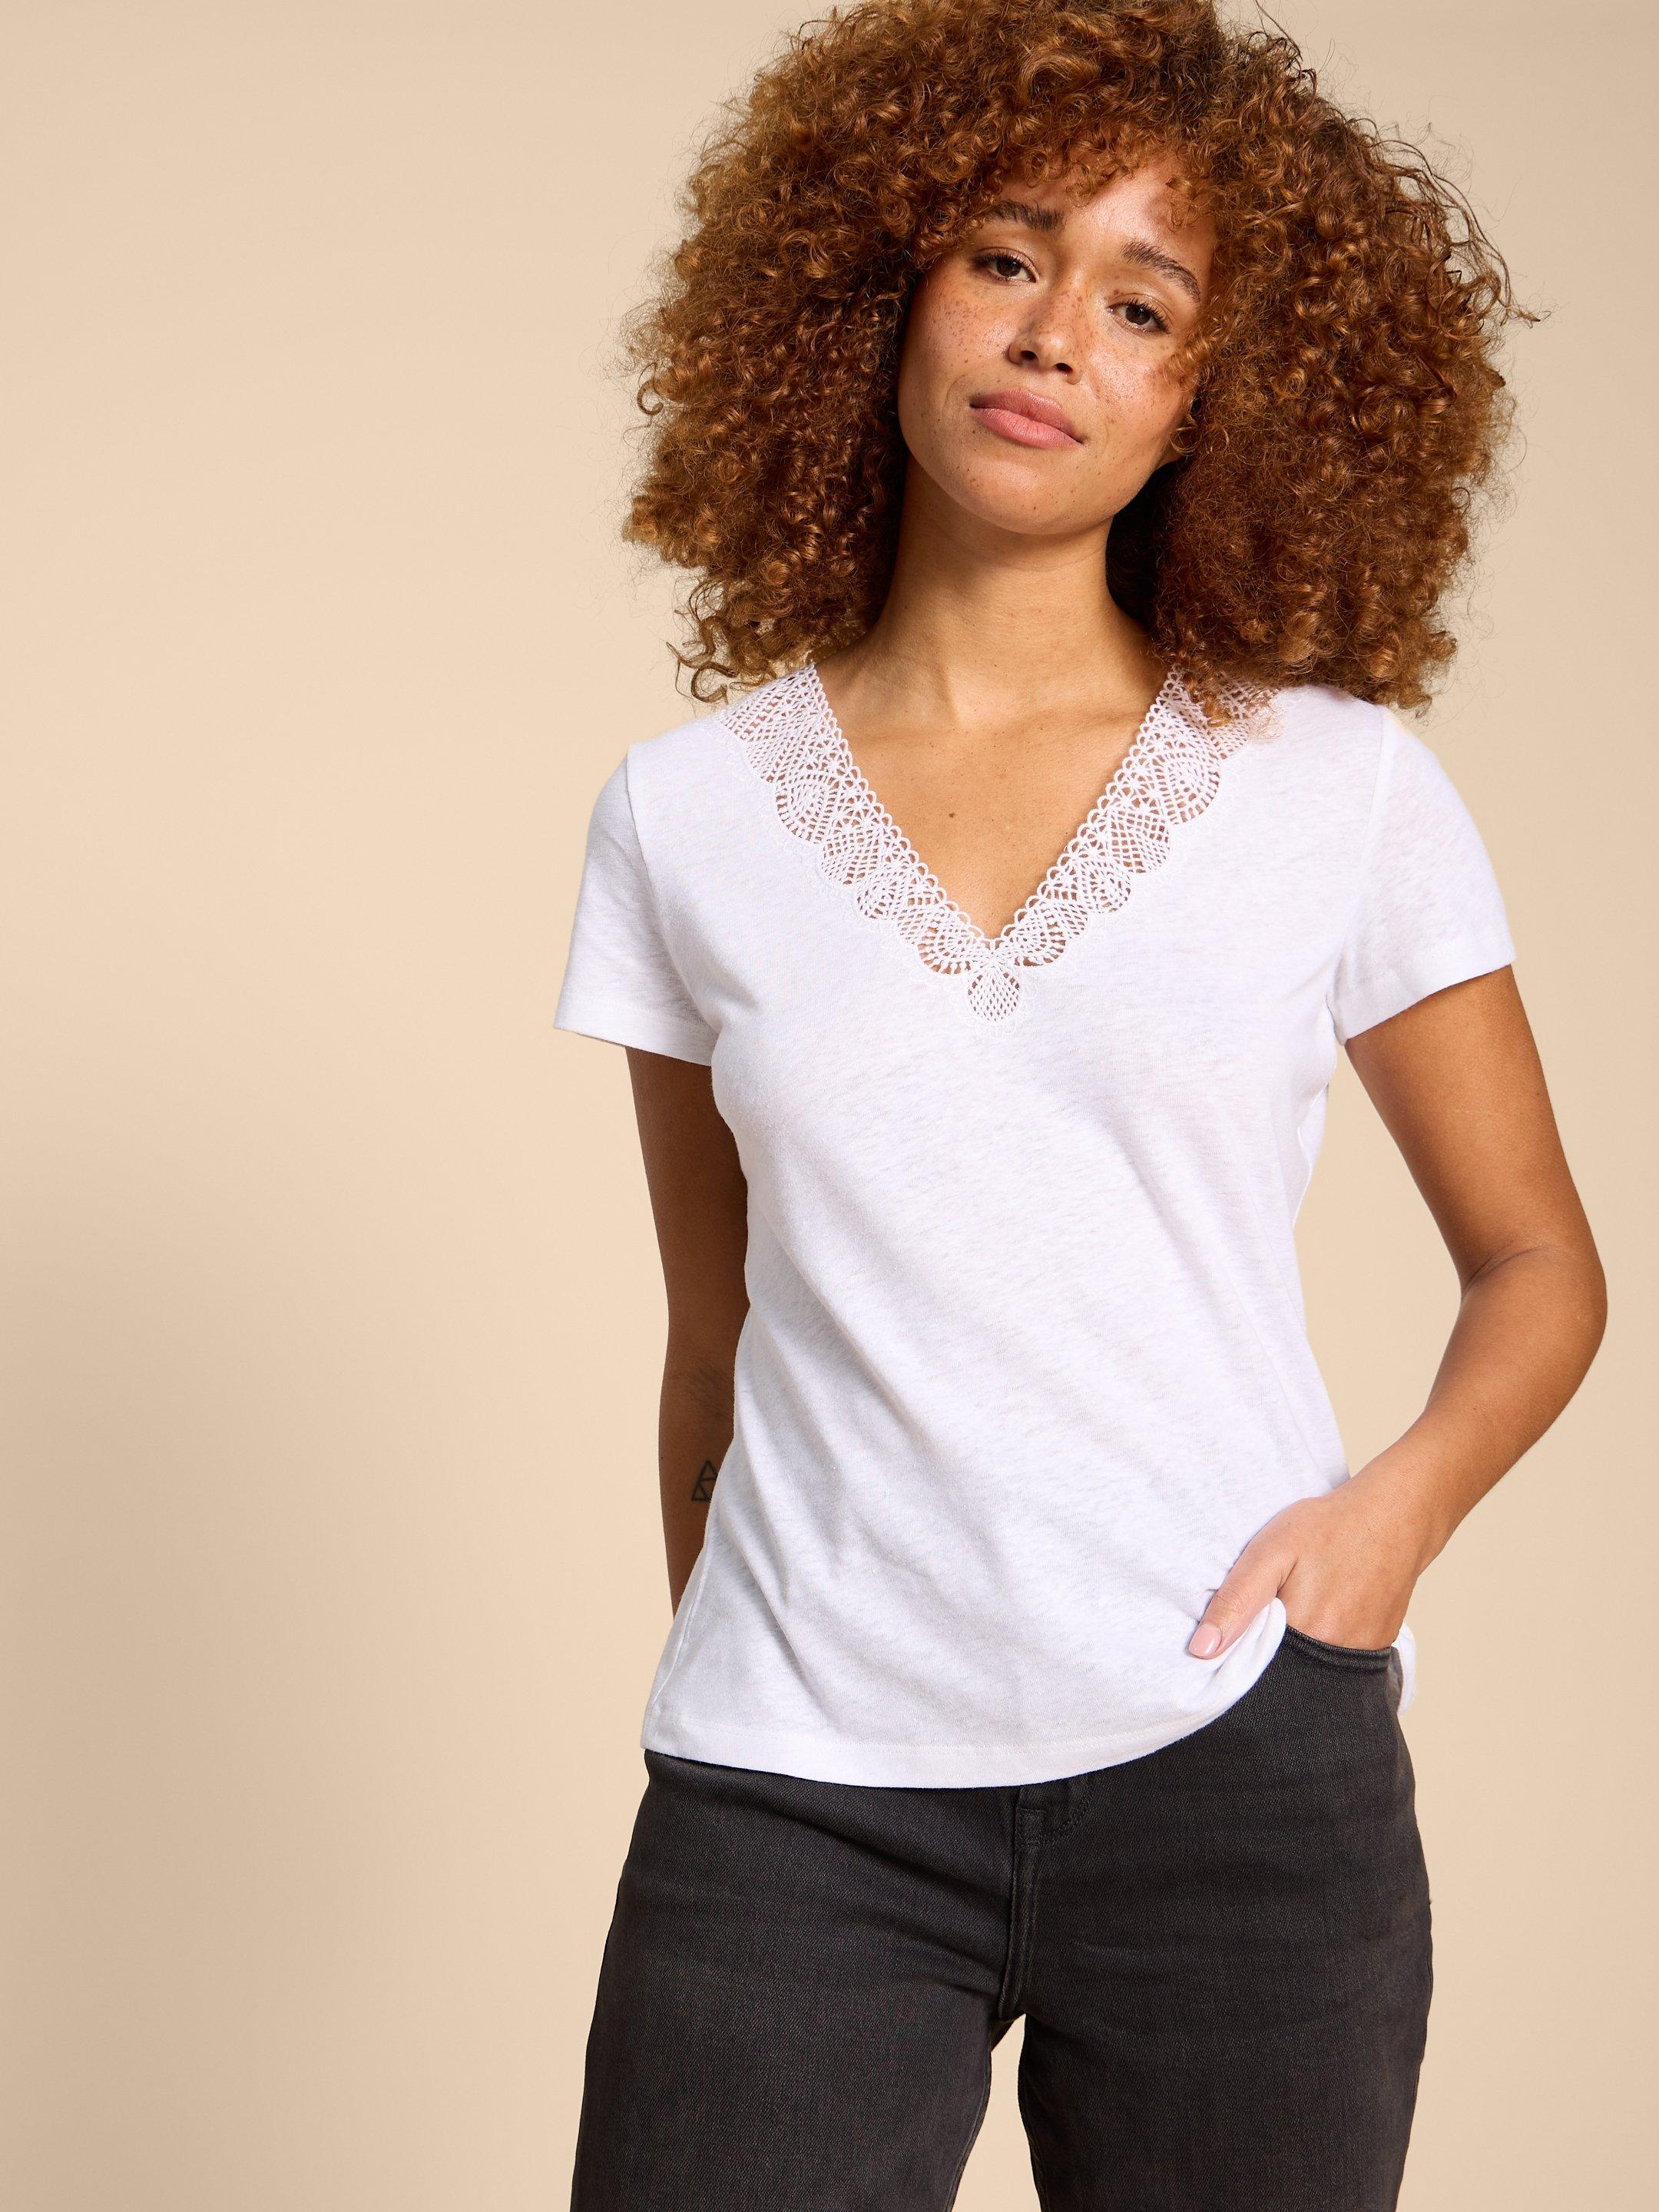 ELLIE LACE TEE in BRIL WHITE - LIFESTYLE